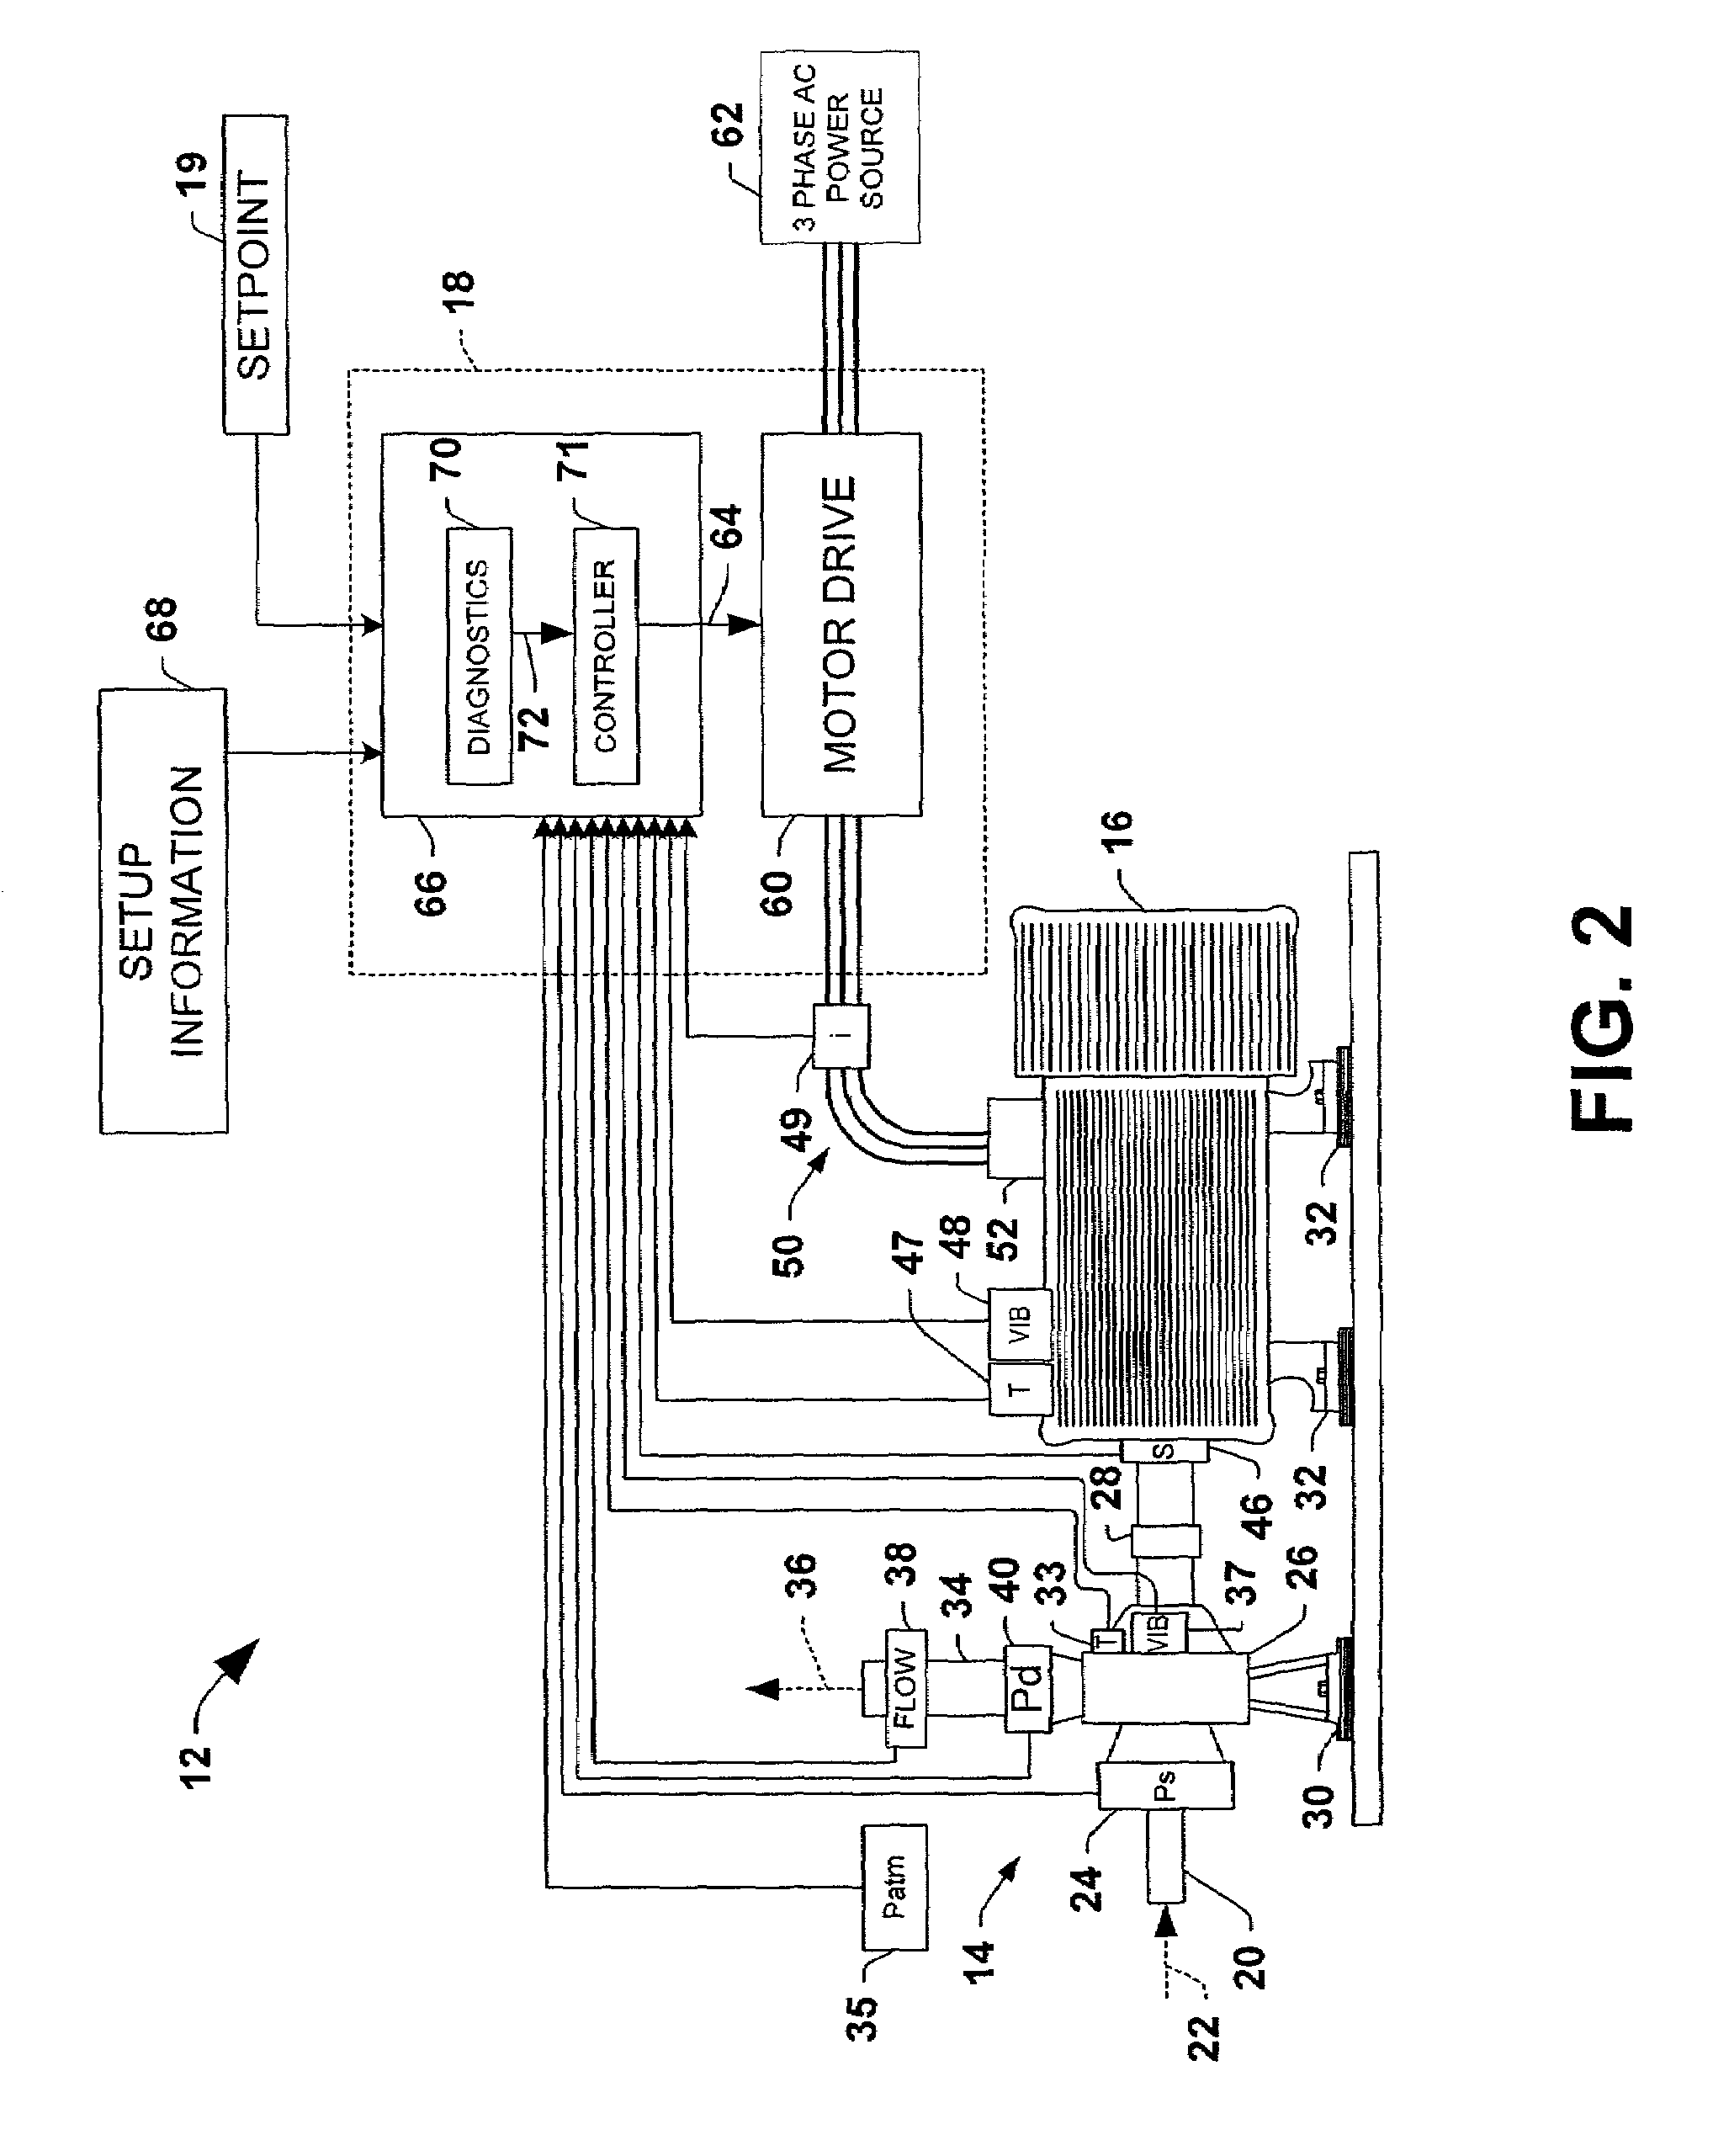 Motorized system integrated control and diagnostics using vibration, pressure, temperature, speed, and/or current analysis